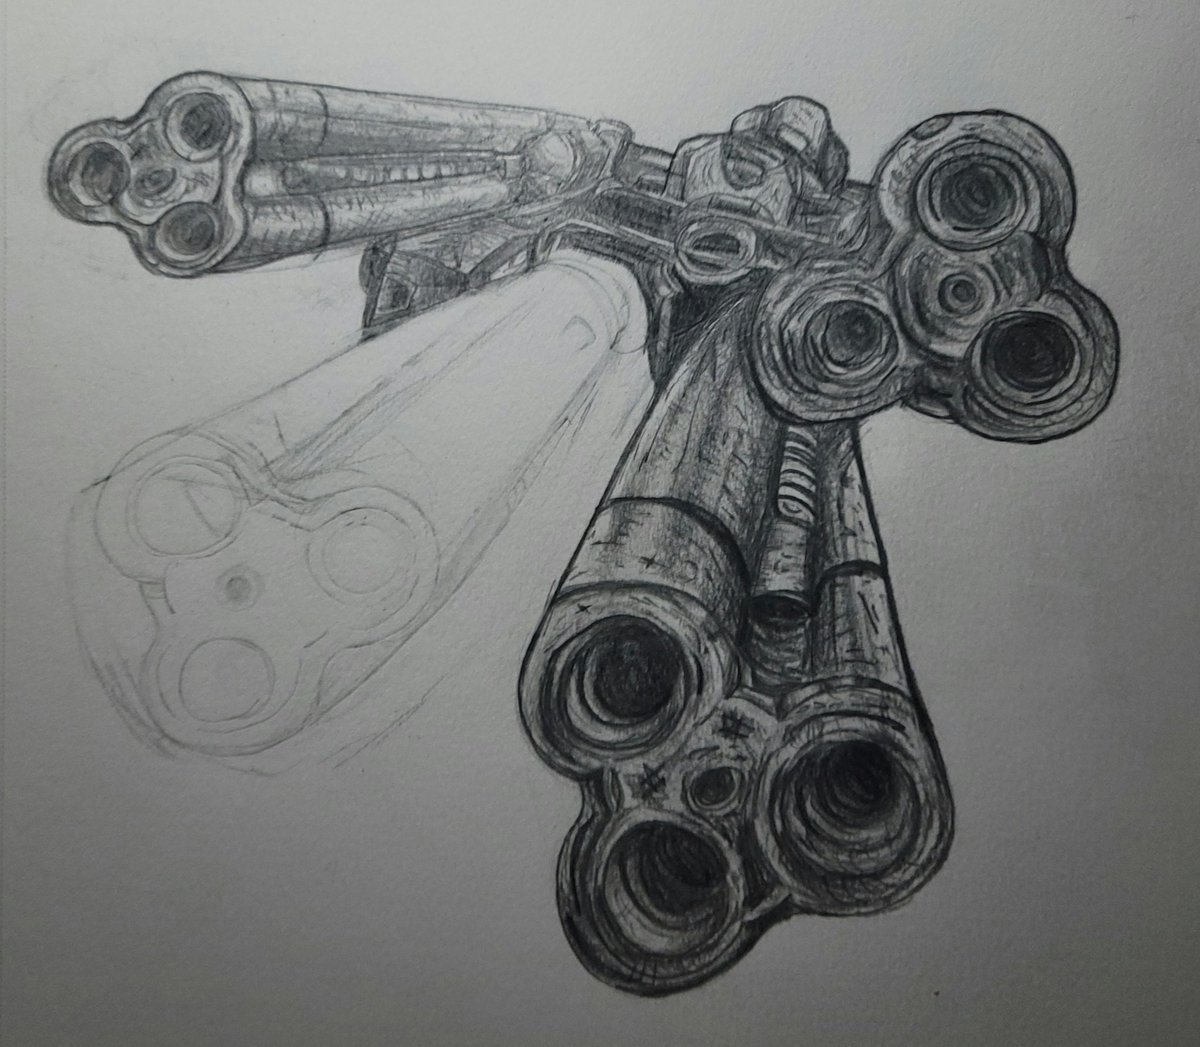 It's almost 11 pm and here's the progress on the gun so far! :]
#wip #madnesscombat #DoomEternal